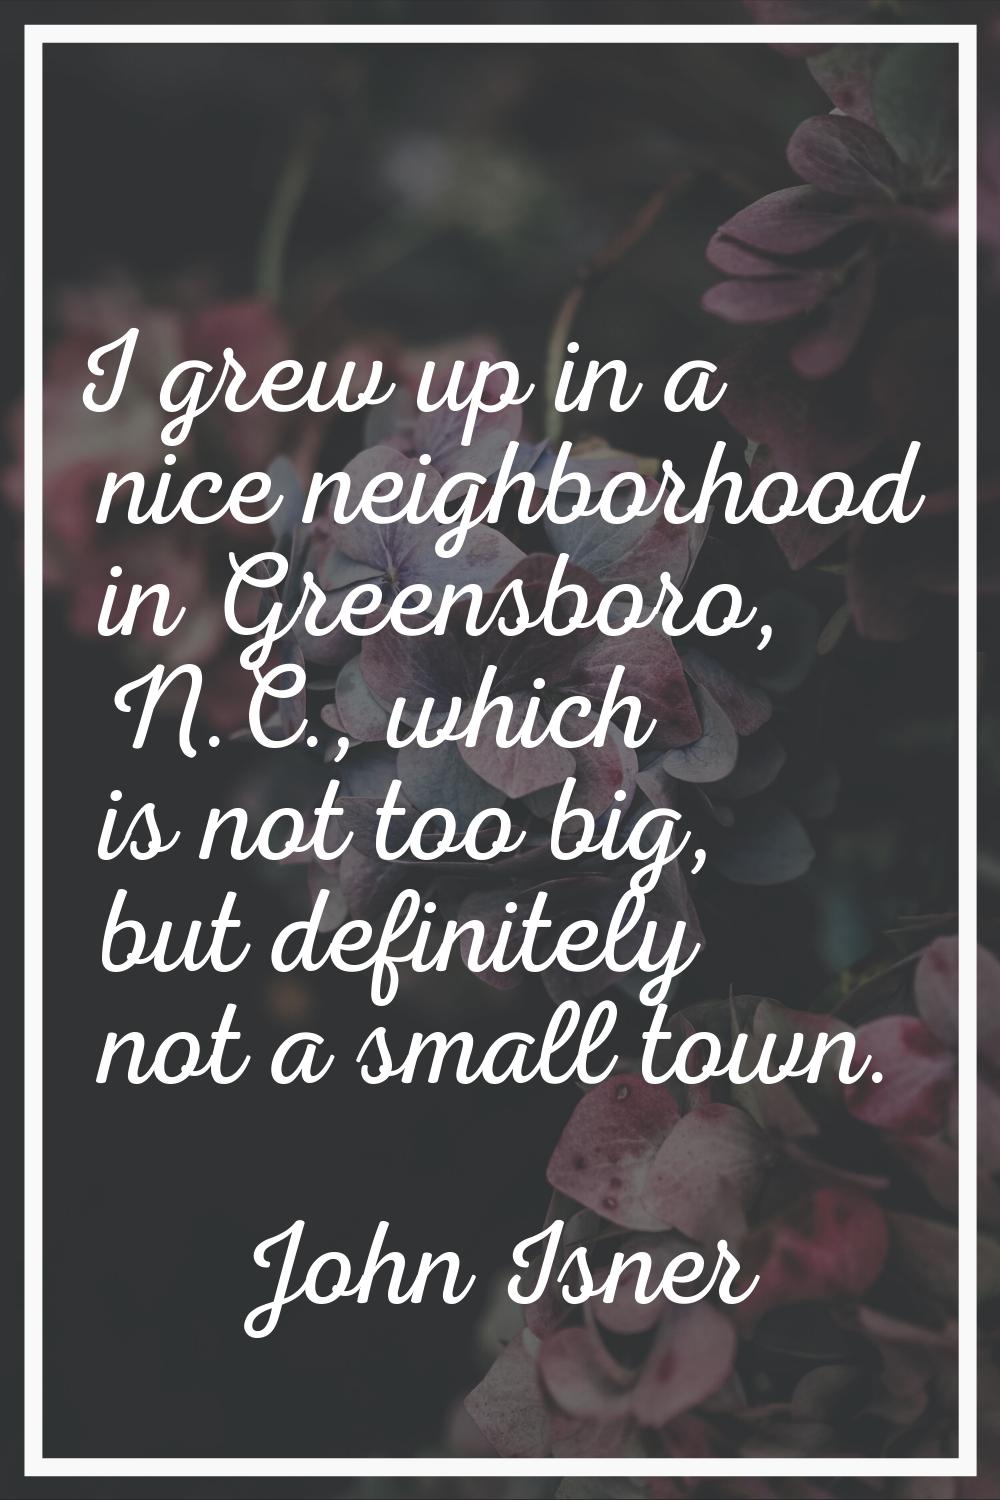 I grew up in a nice neighborhood in Greensboro, N.C., which is not too big, but definitely not a sm